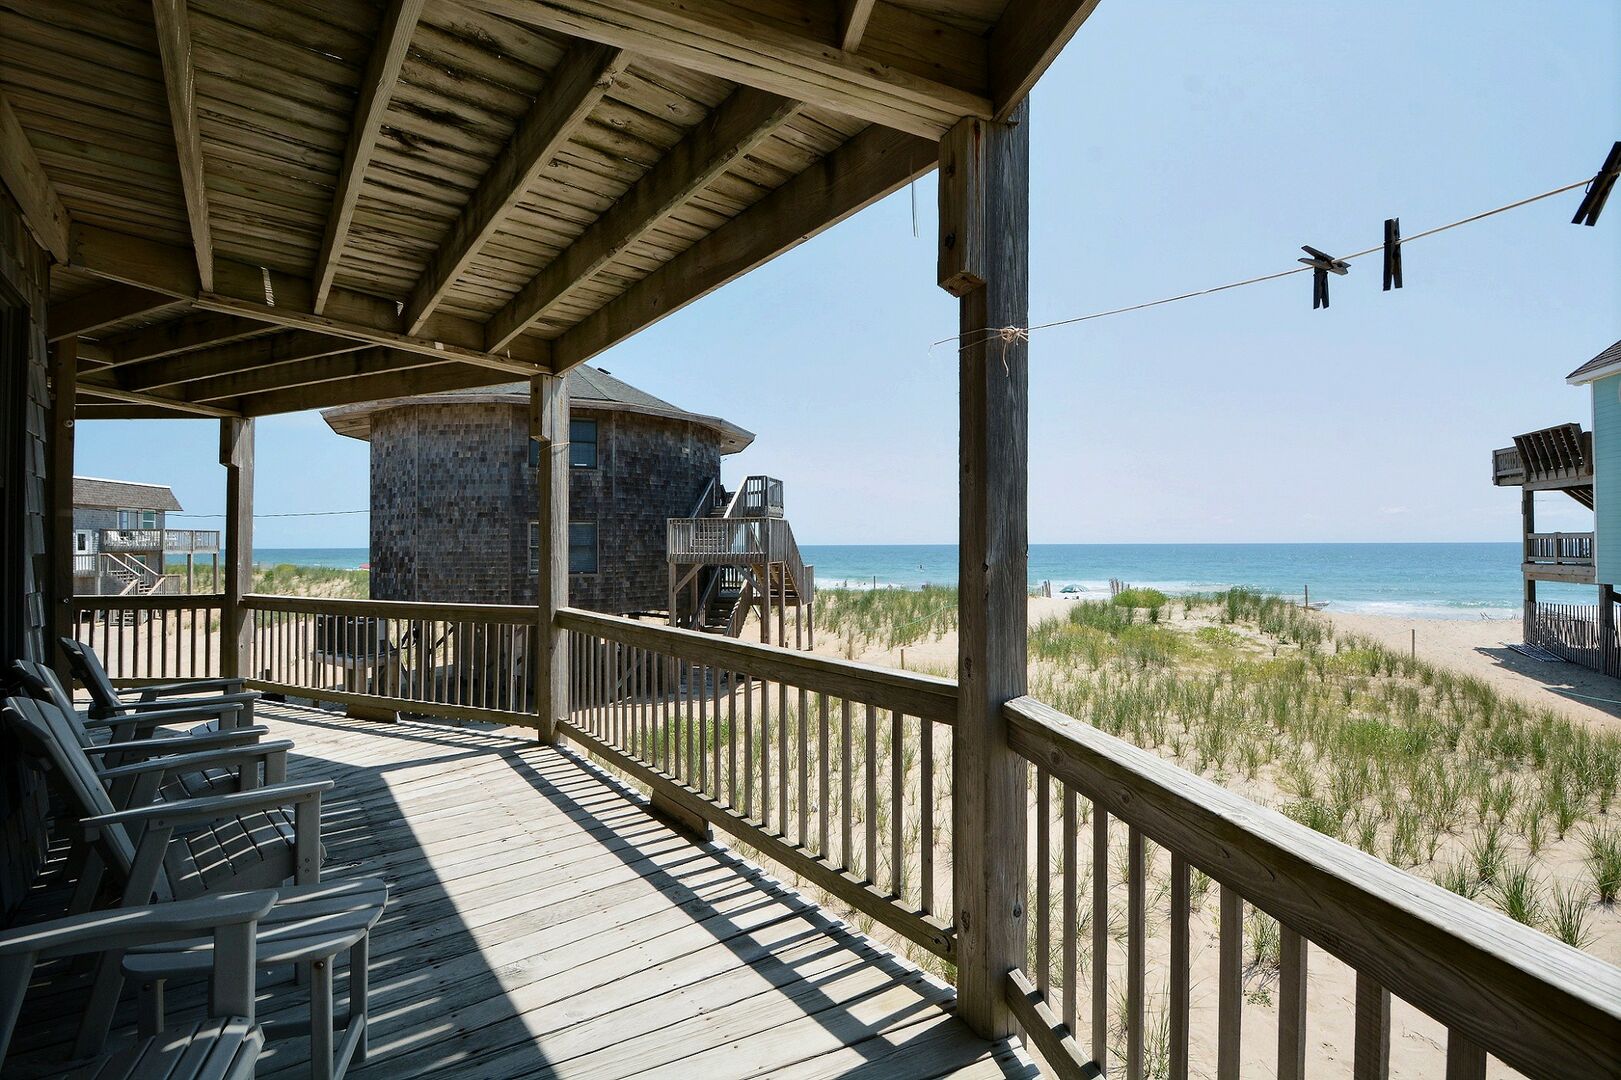 Views of other homes form the patio of one of our Cape Hatteras Airbnbs